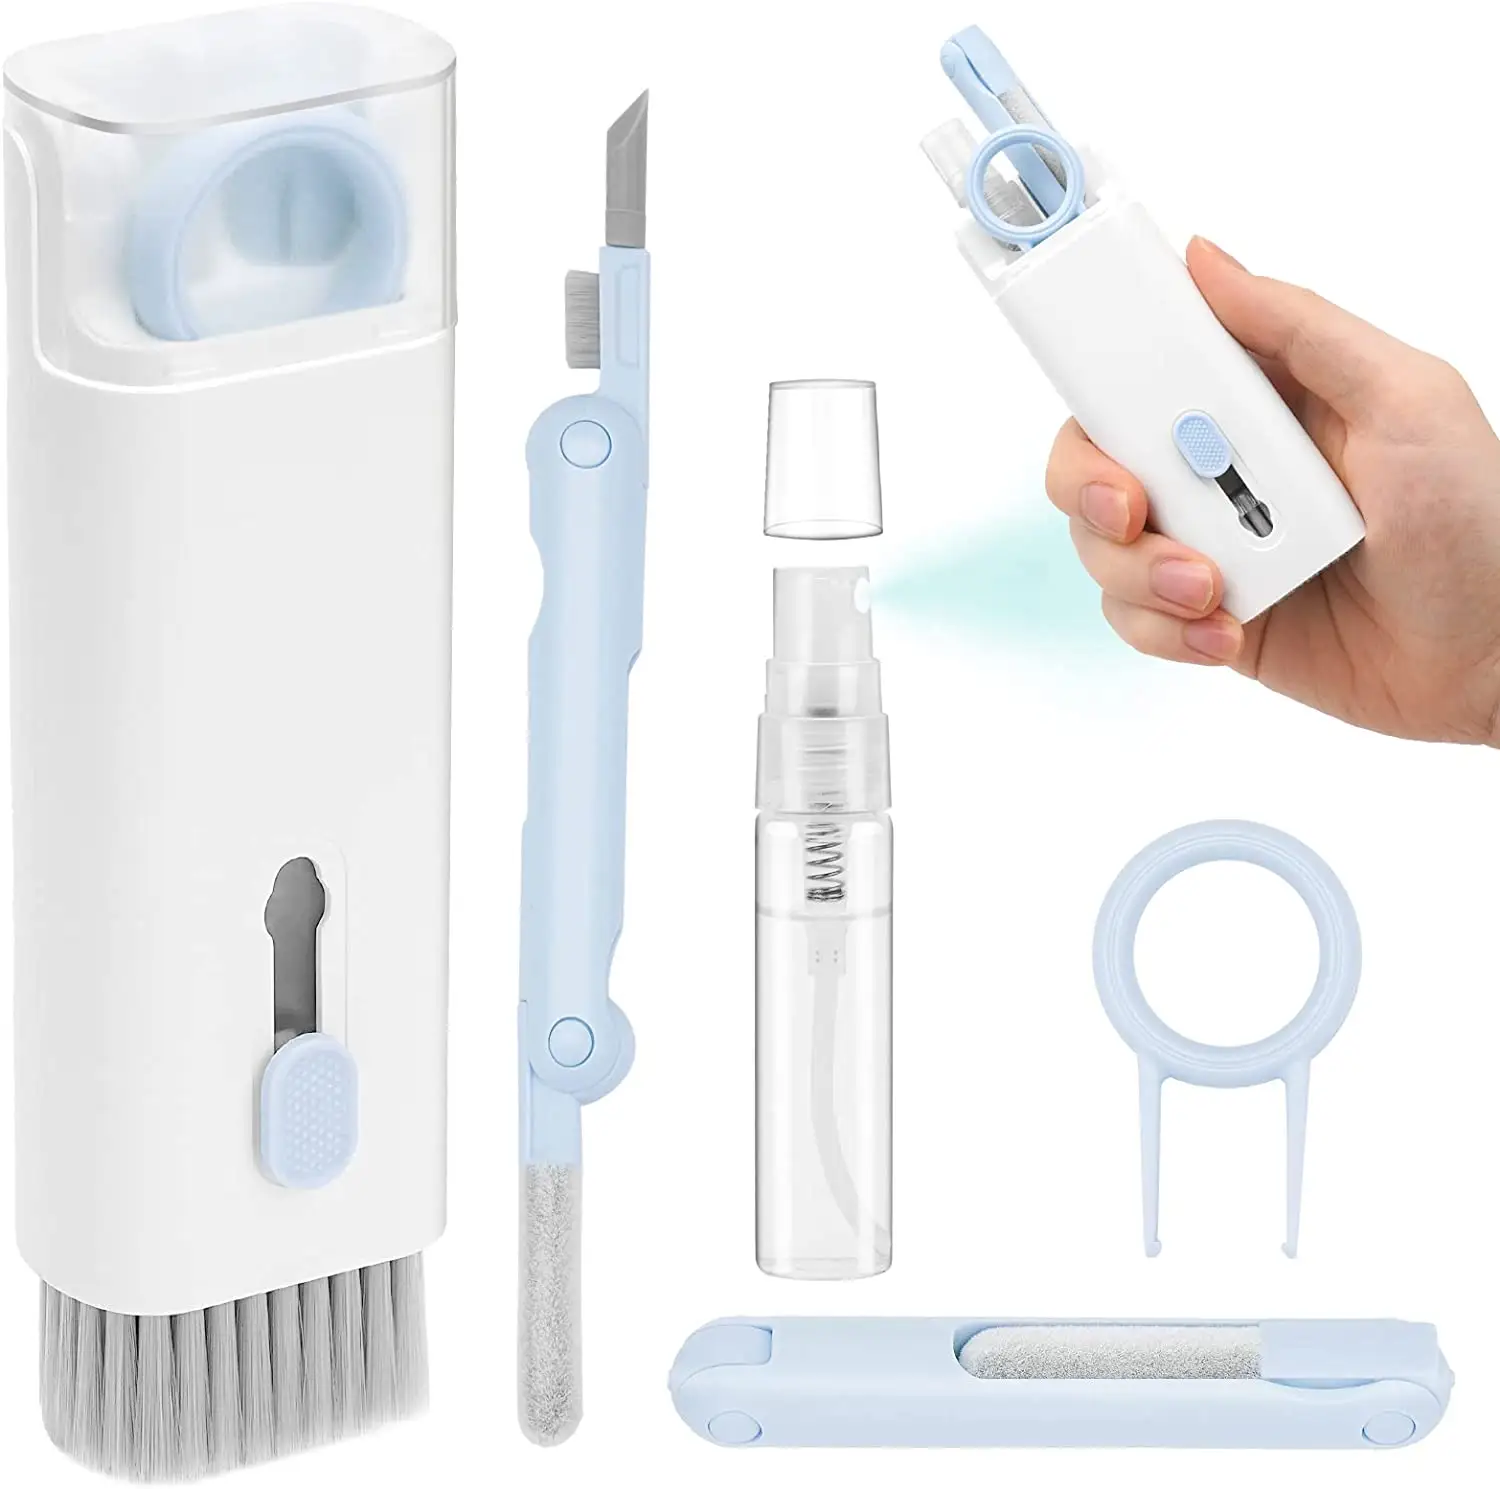 2023 New Product Multifunction Cleaning Kit Tool for Airpods Keyboard Phone and Airpods